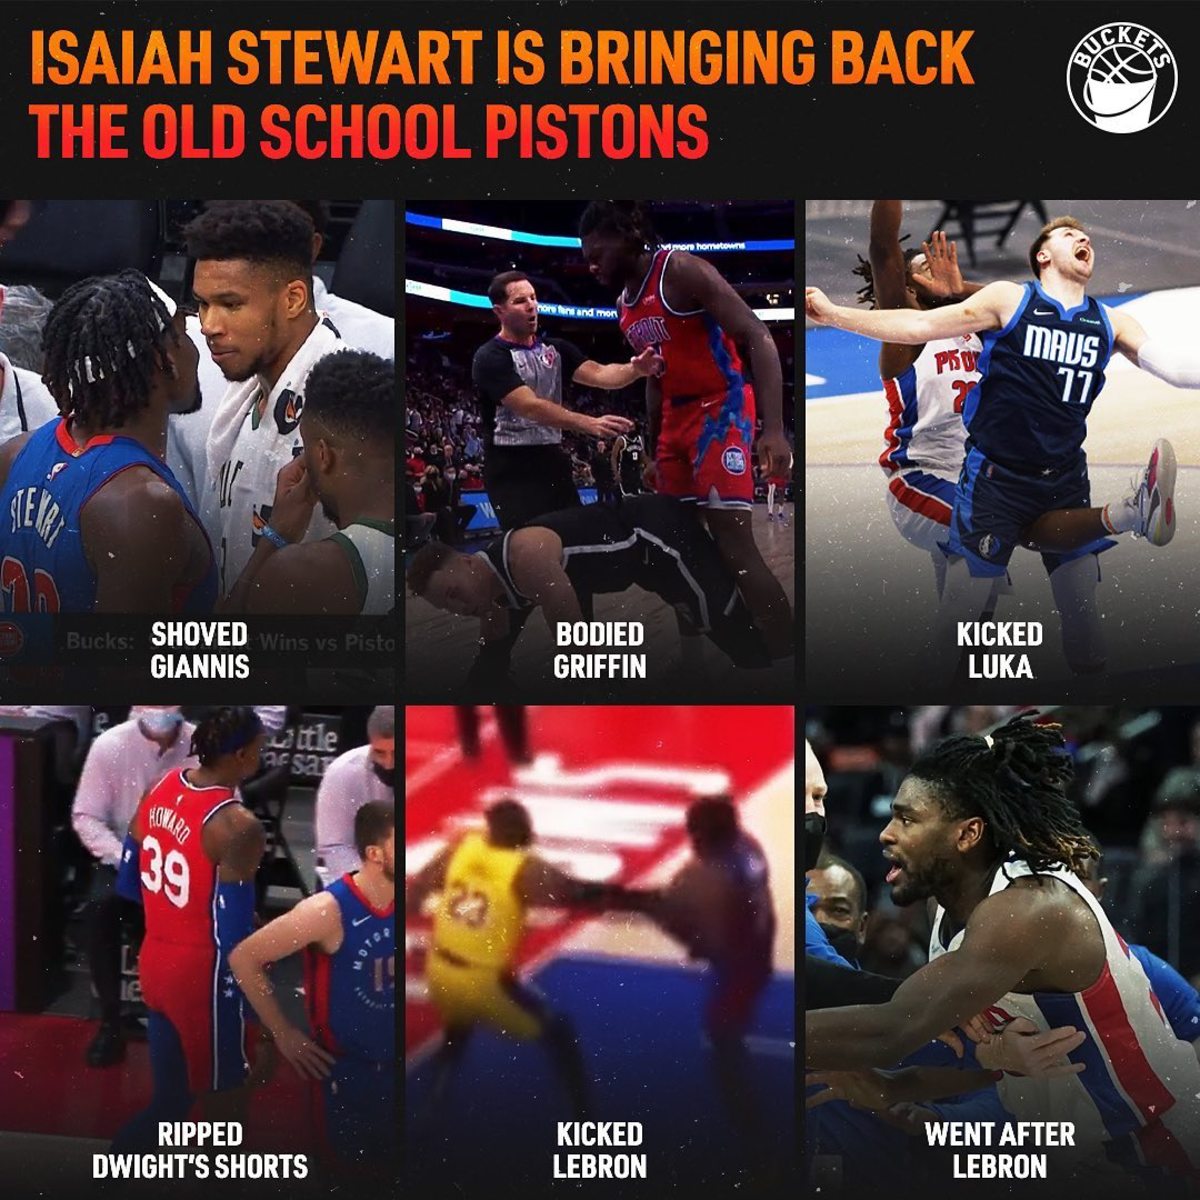 Isaiah Stewart Is Bringing Back The Old School Detroit Pistons: Fought LeBron, Shoved Giannis, Kicked Luka